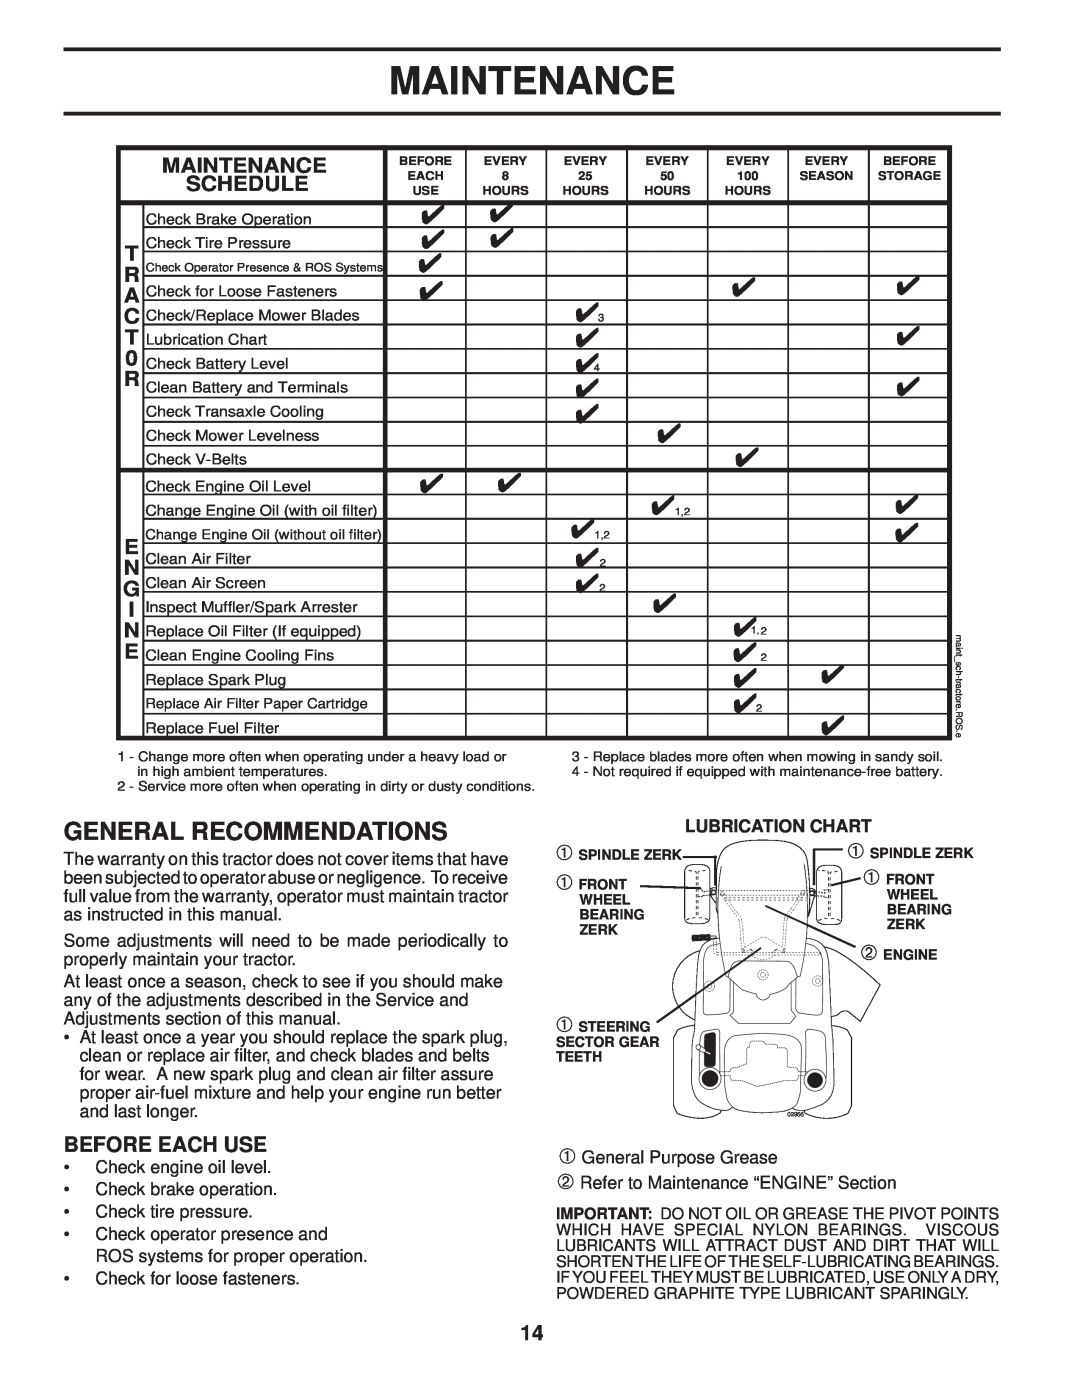 Poulan PB22TH42YT manual Maintenance, General Recommendations, Schedule, Before Each Use 